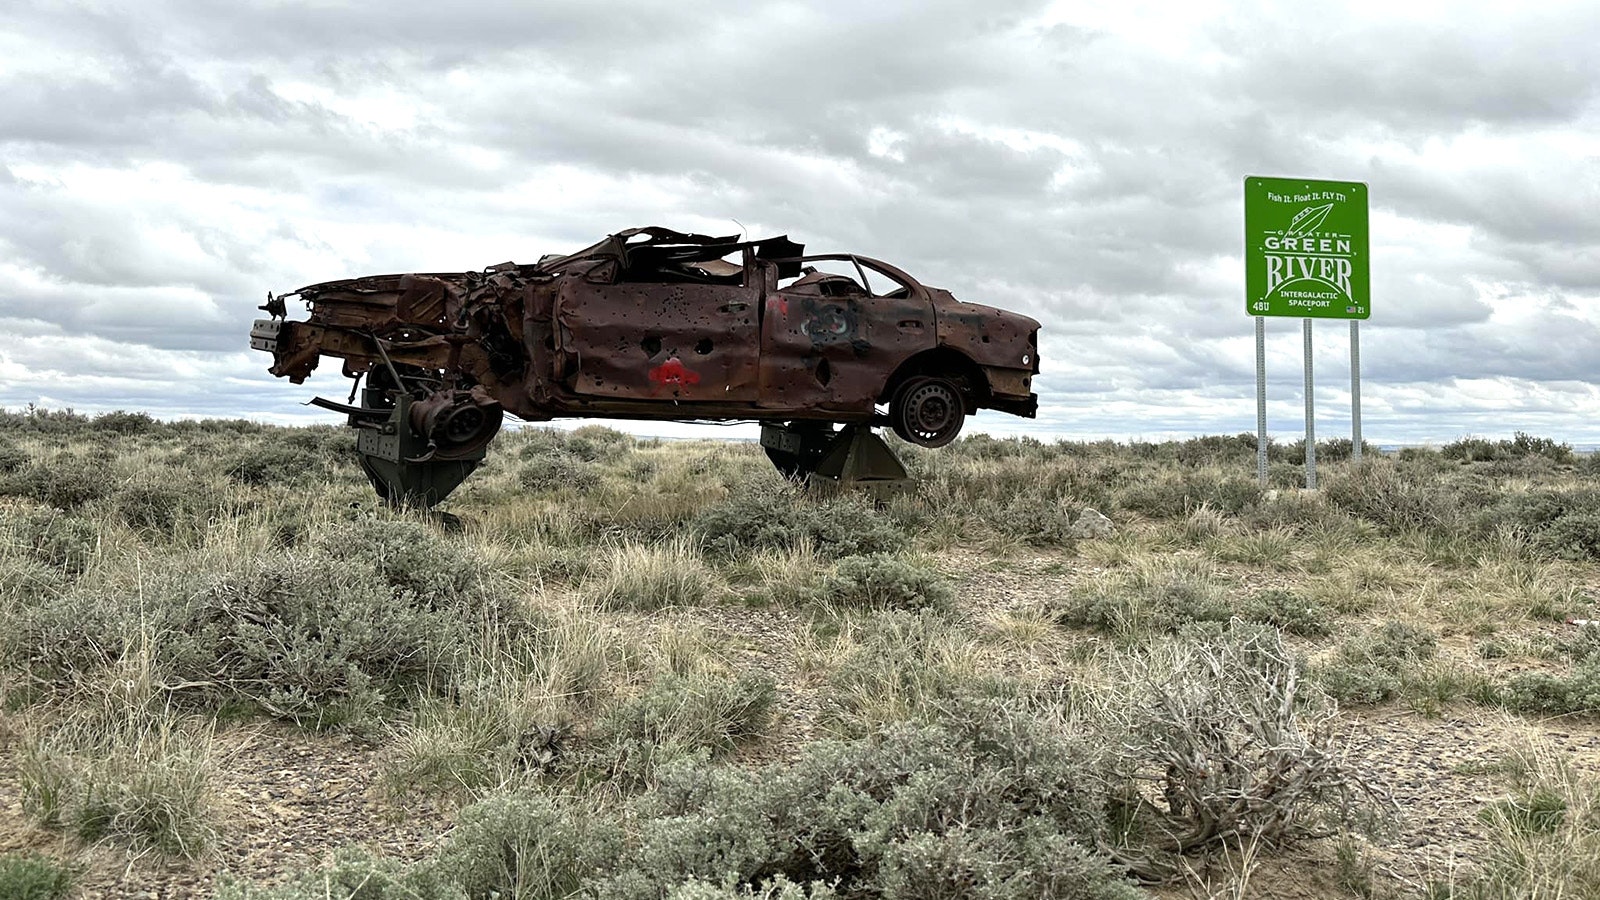 For some reason, a rusty wrecked car is perched near the Greater Green River Intergalactic Spaceport in southwest Wyoming. The bullet holes show that over the years, it's taken more than its fair share of pot shots.